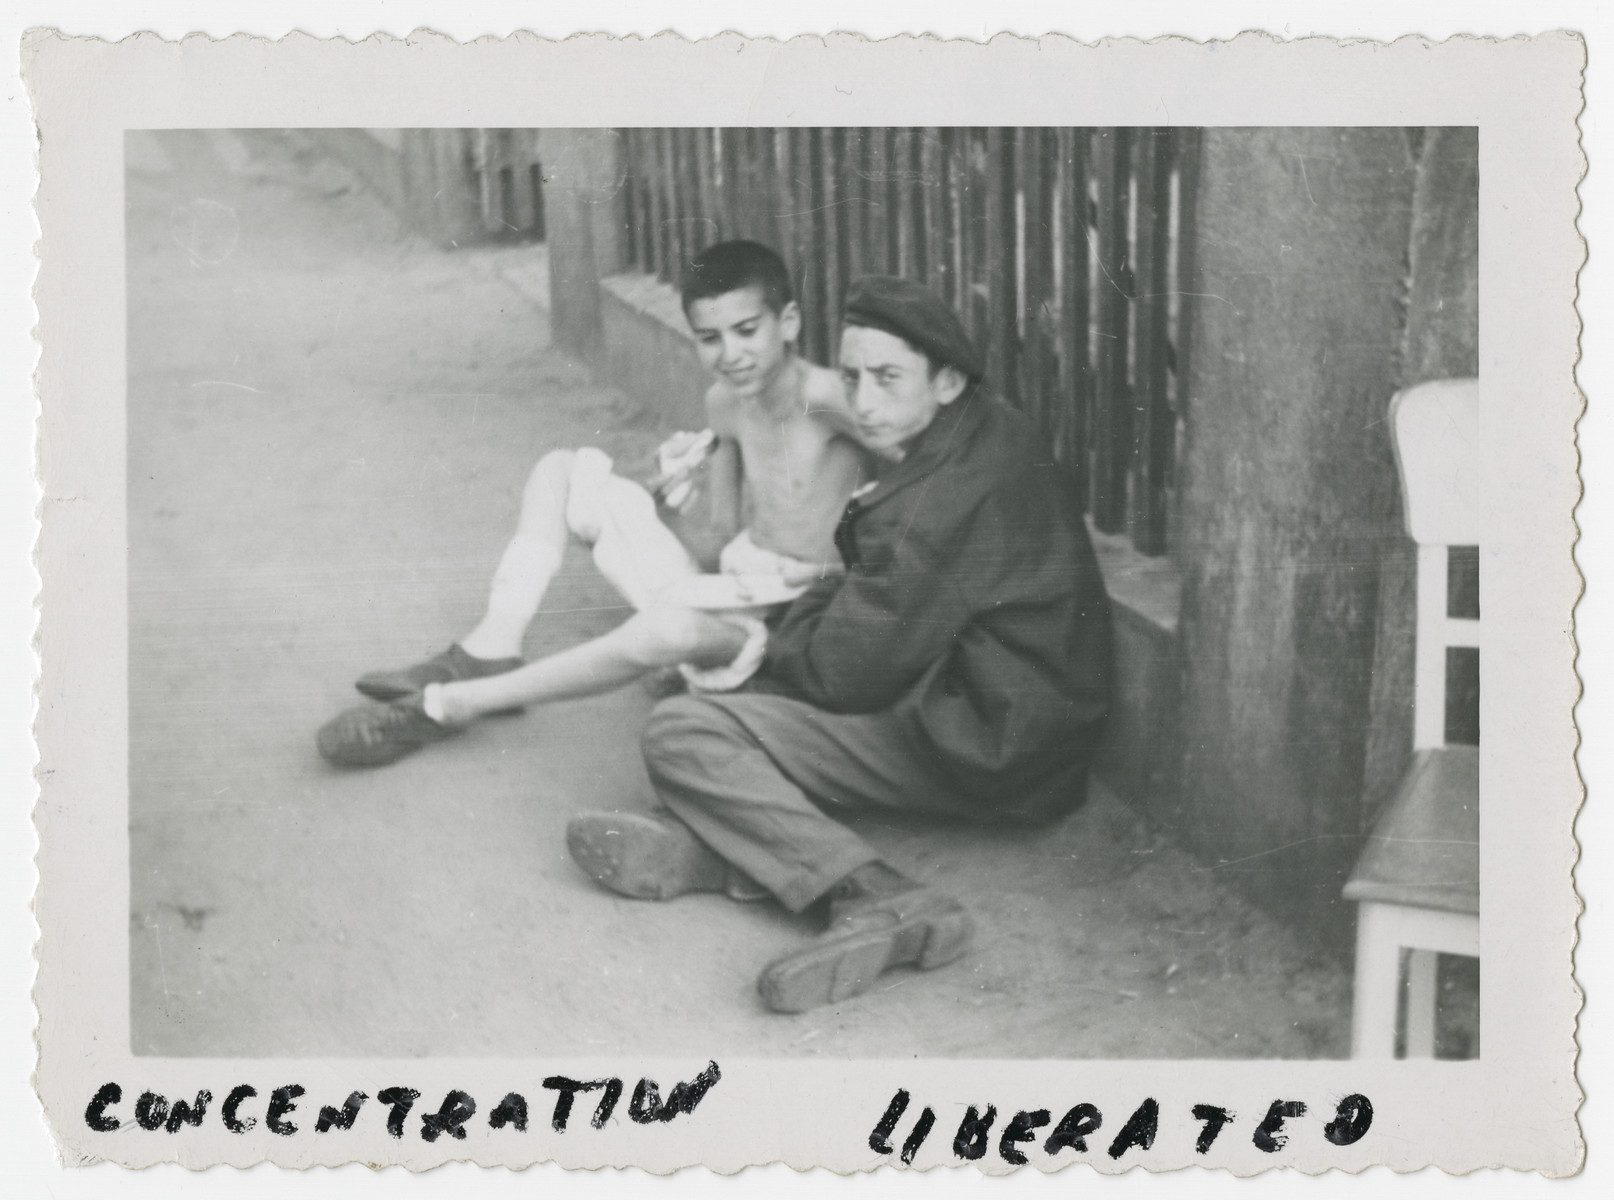 Two young prisoners from the Woebbelin concentration camp lean against a fence after liberation.  

The one farthest from camera was interned at age 15 and was liberated at age 18.  He weighed 60 lbs when liberated.